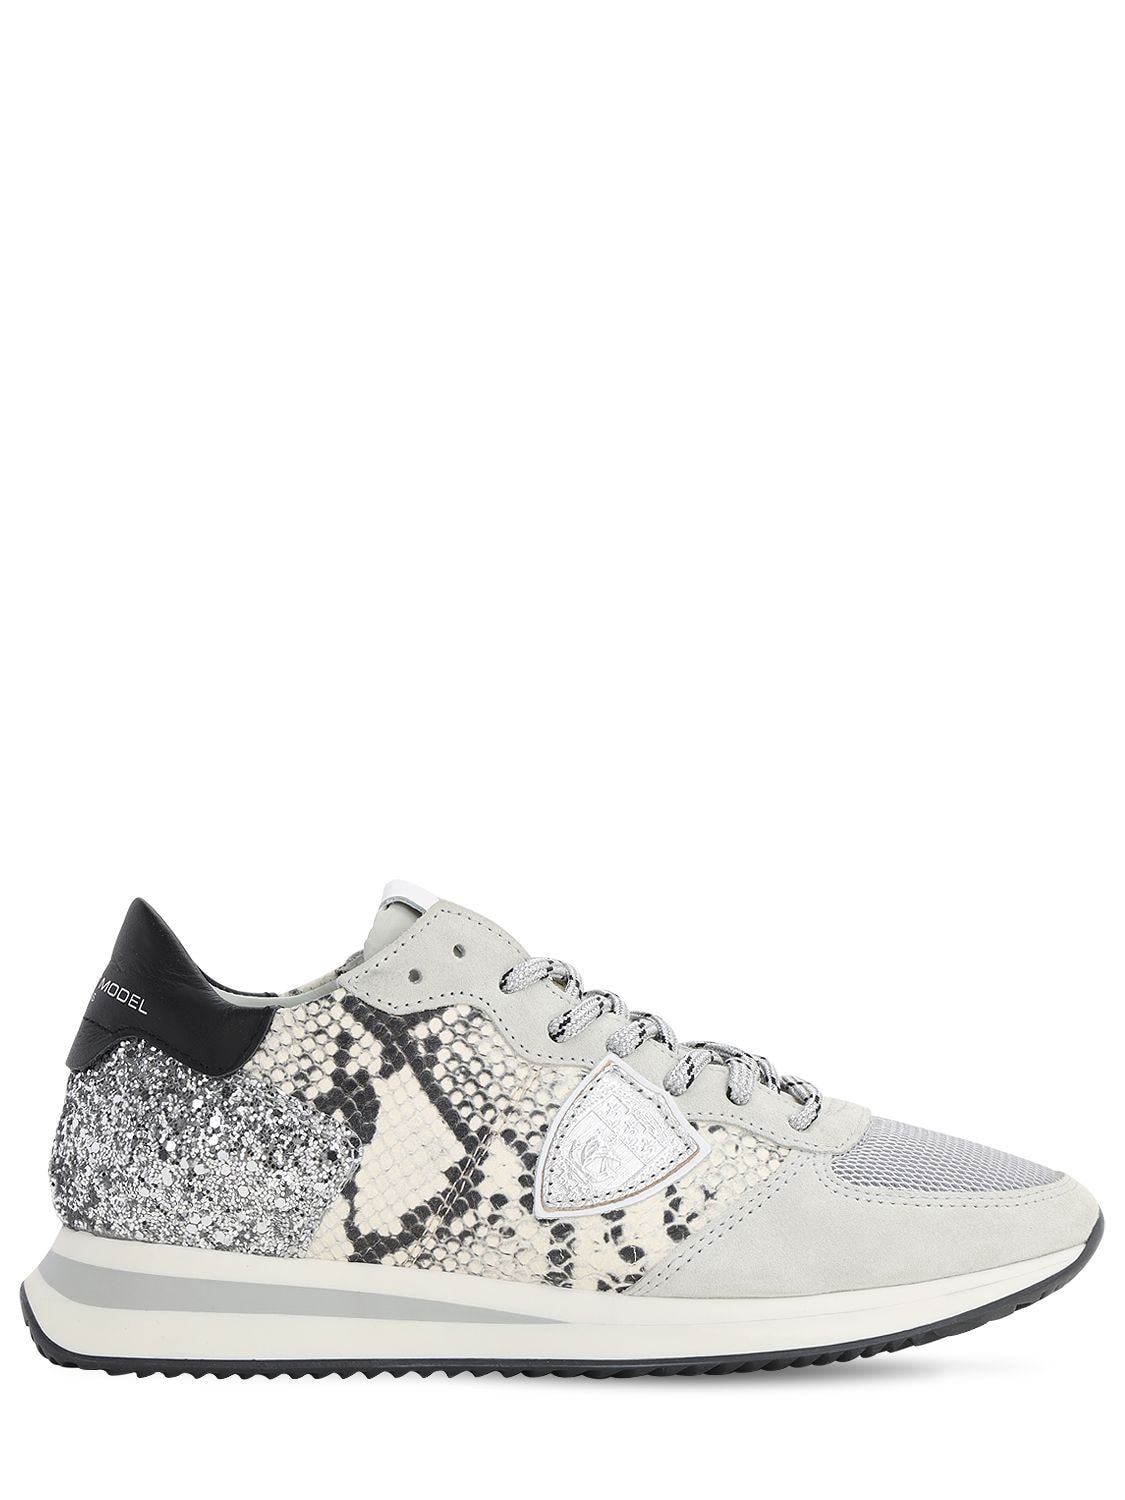 Philippe Model Trpx Phyton Print Glittered Sneakers In Grey